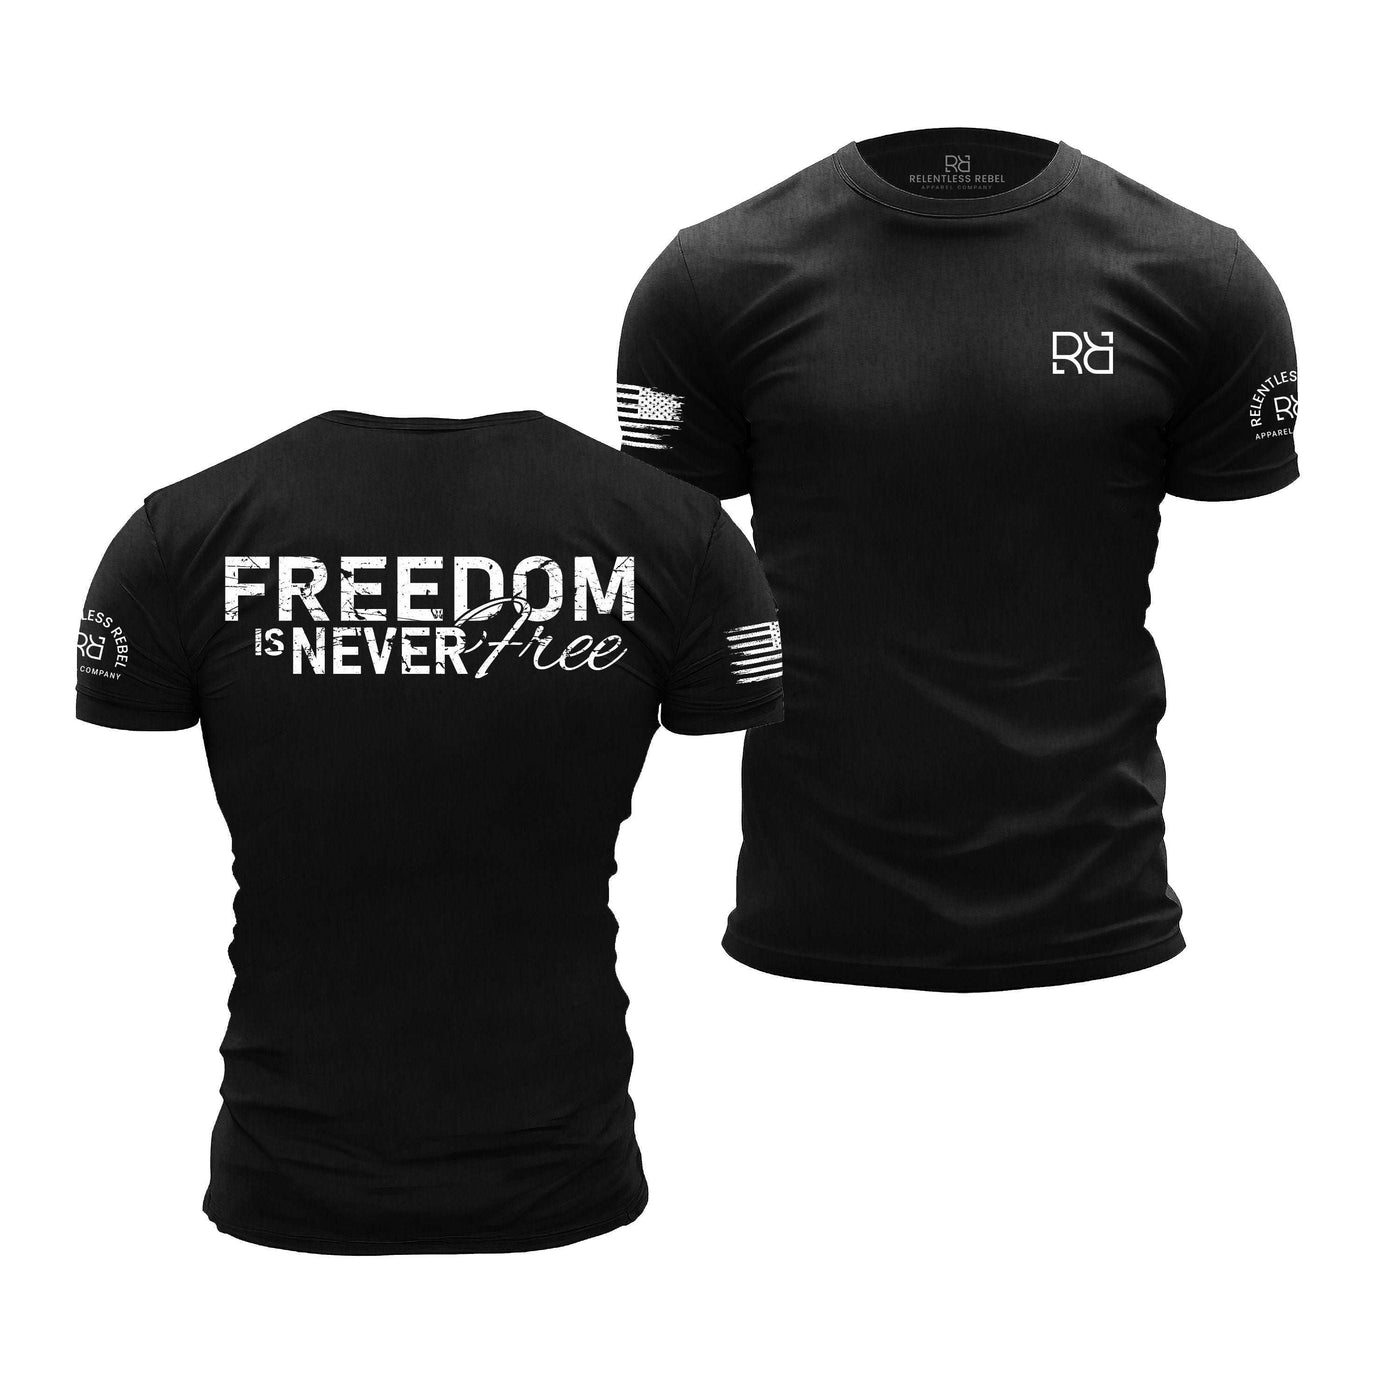 Solid Black Men's Freedom Is Never Free Back Design Tee